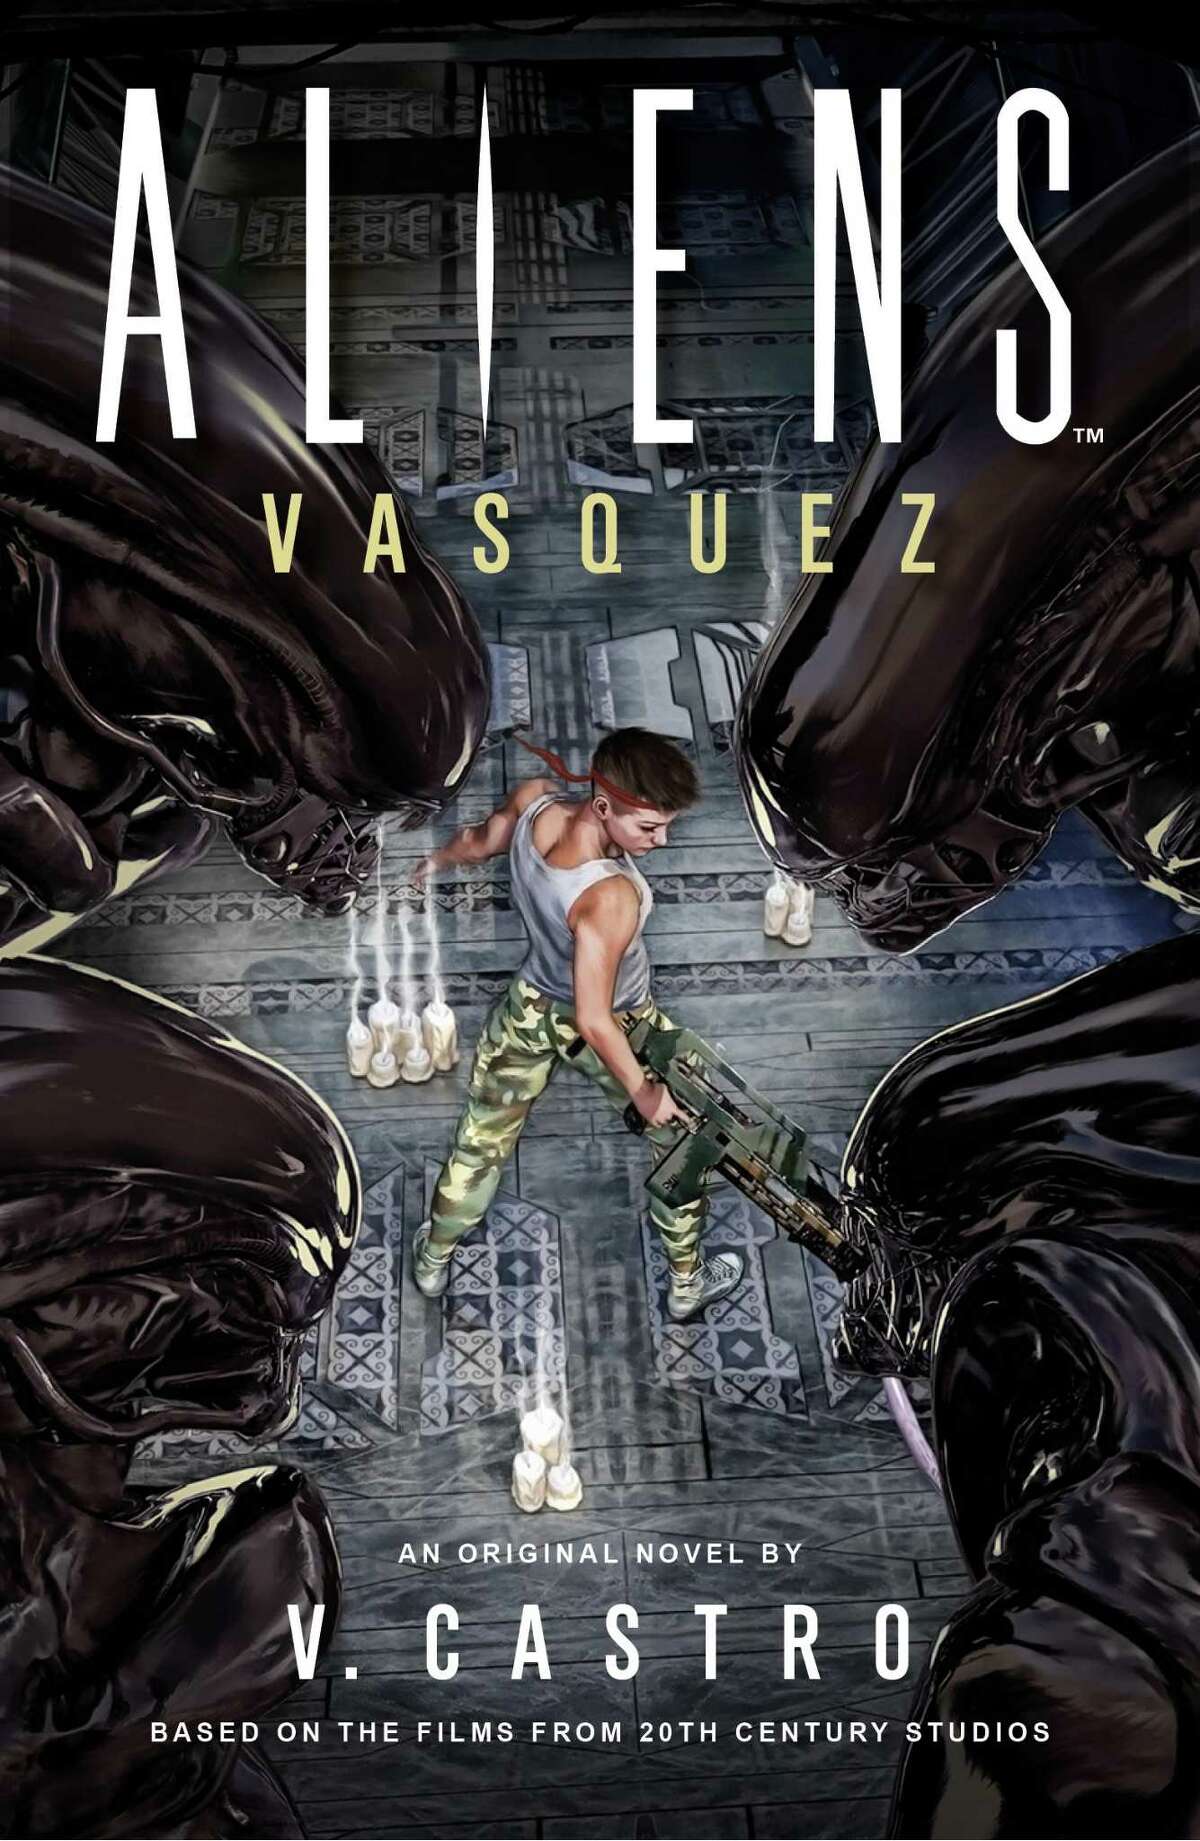 San Antonian V Castro wrote "Aliens: Vasquez," a novel exploring the back story and legacy of PFC Jenette Vasquez, who appeared in the movie "Aliens."